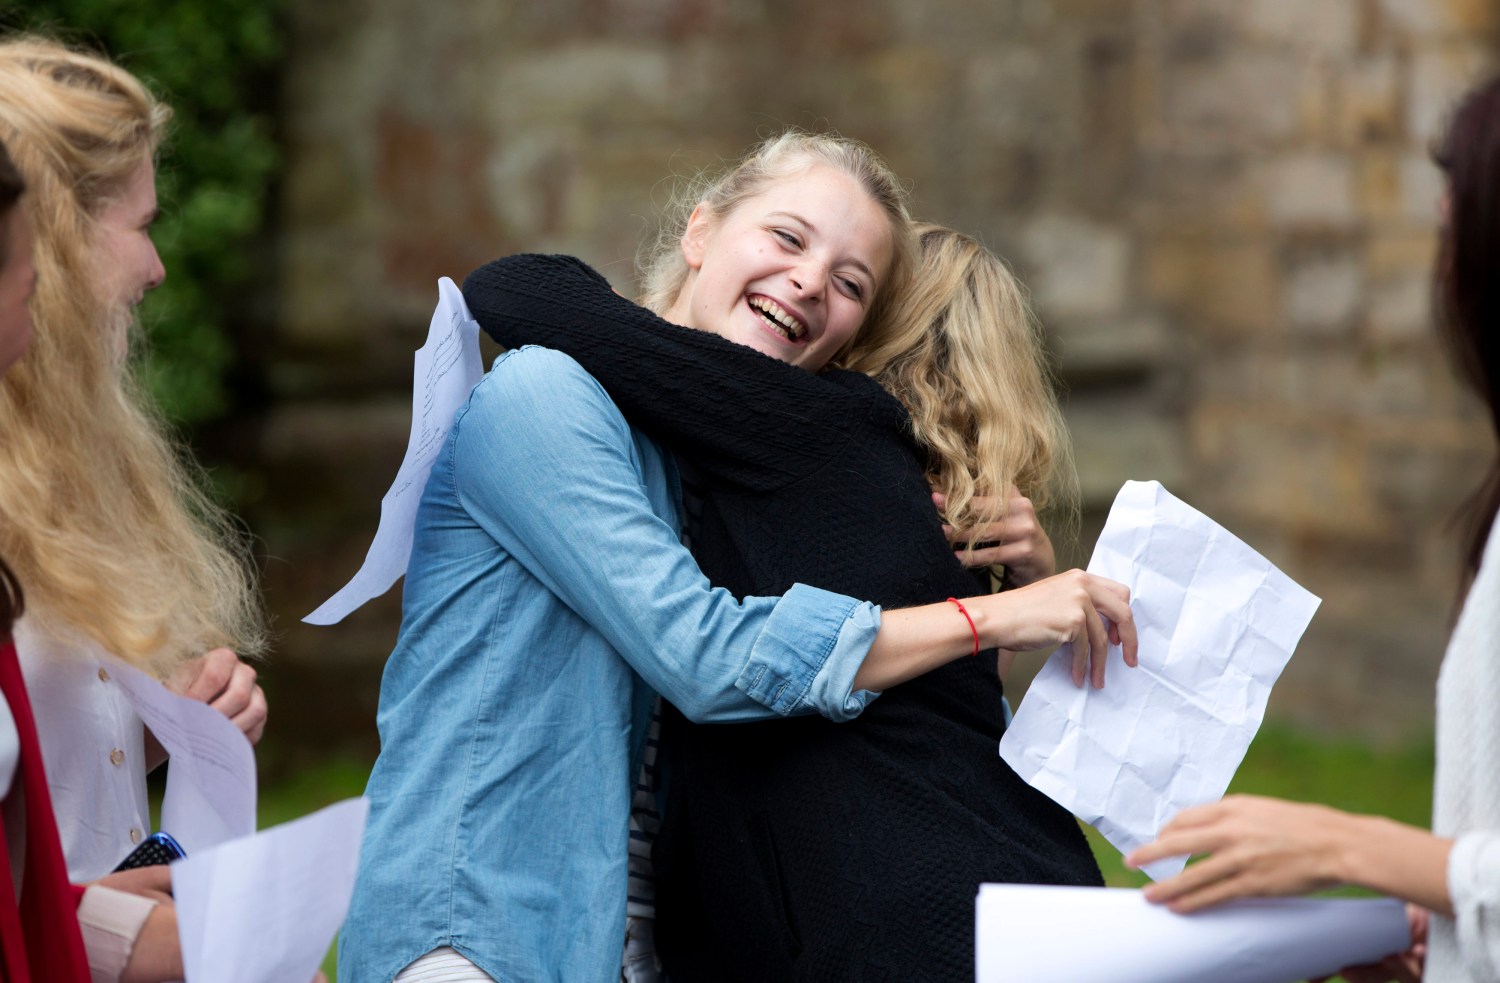 Pupils react after receiving their A-level exam results at St Leonards-Mayfield School in Mayfield, southern England August 15, 2013. More than 300,000 teenage students received their A-level results, in England, Wales and Northern Ireland on Thursday.    REUTERS/Neil Hall (BRITAIN - Tags: EDUCATION SOCIETY) - LM1E98F0SJU01